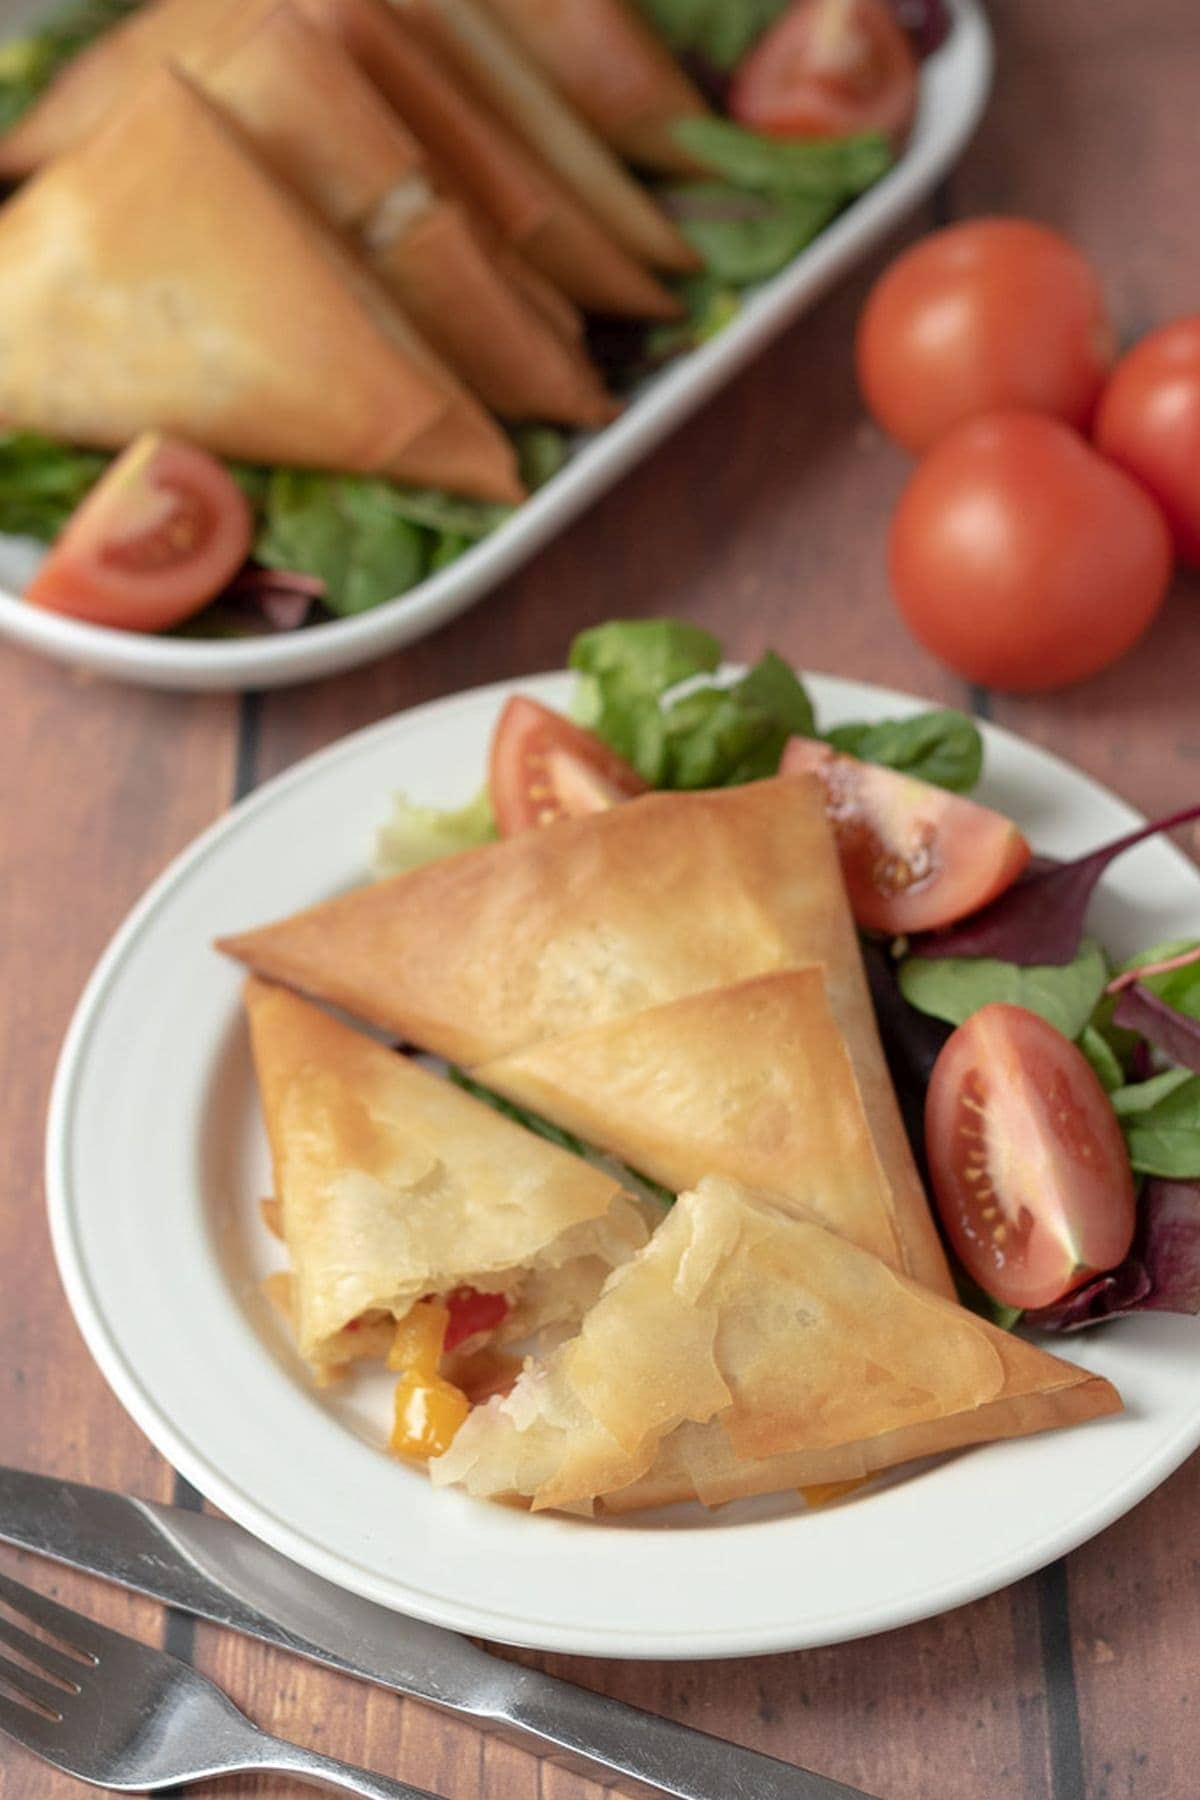 A plate of roast vegetable filo parcels and salad with one of the filo parcels cut in half with the roasted vegetable filo showing. The rest of the parcels on a serving platter in the background.